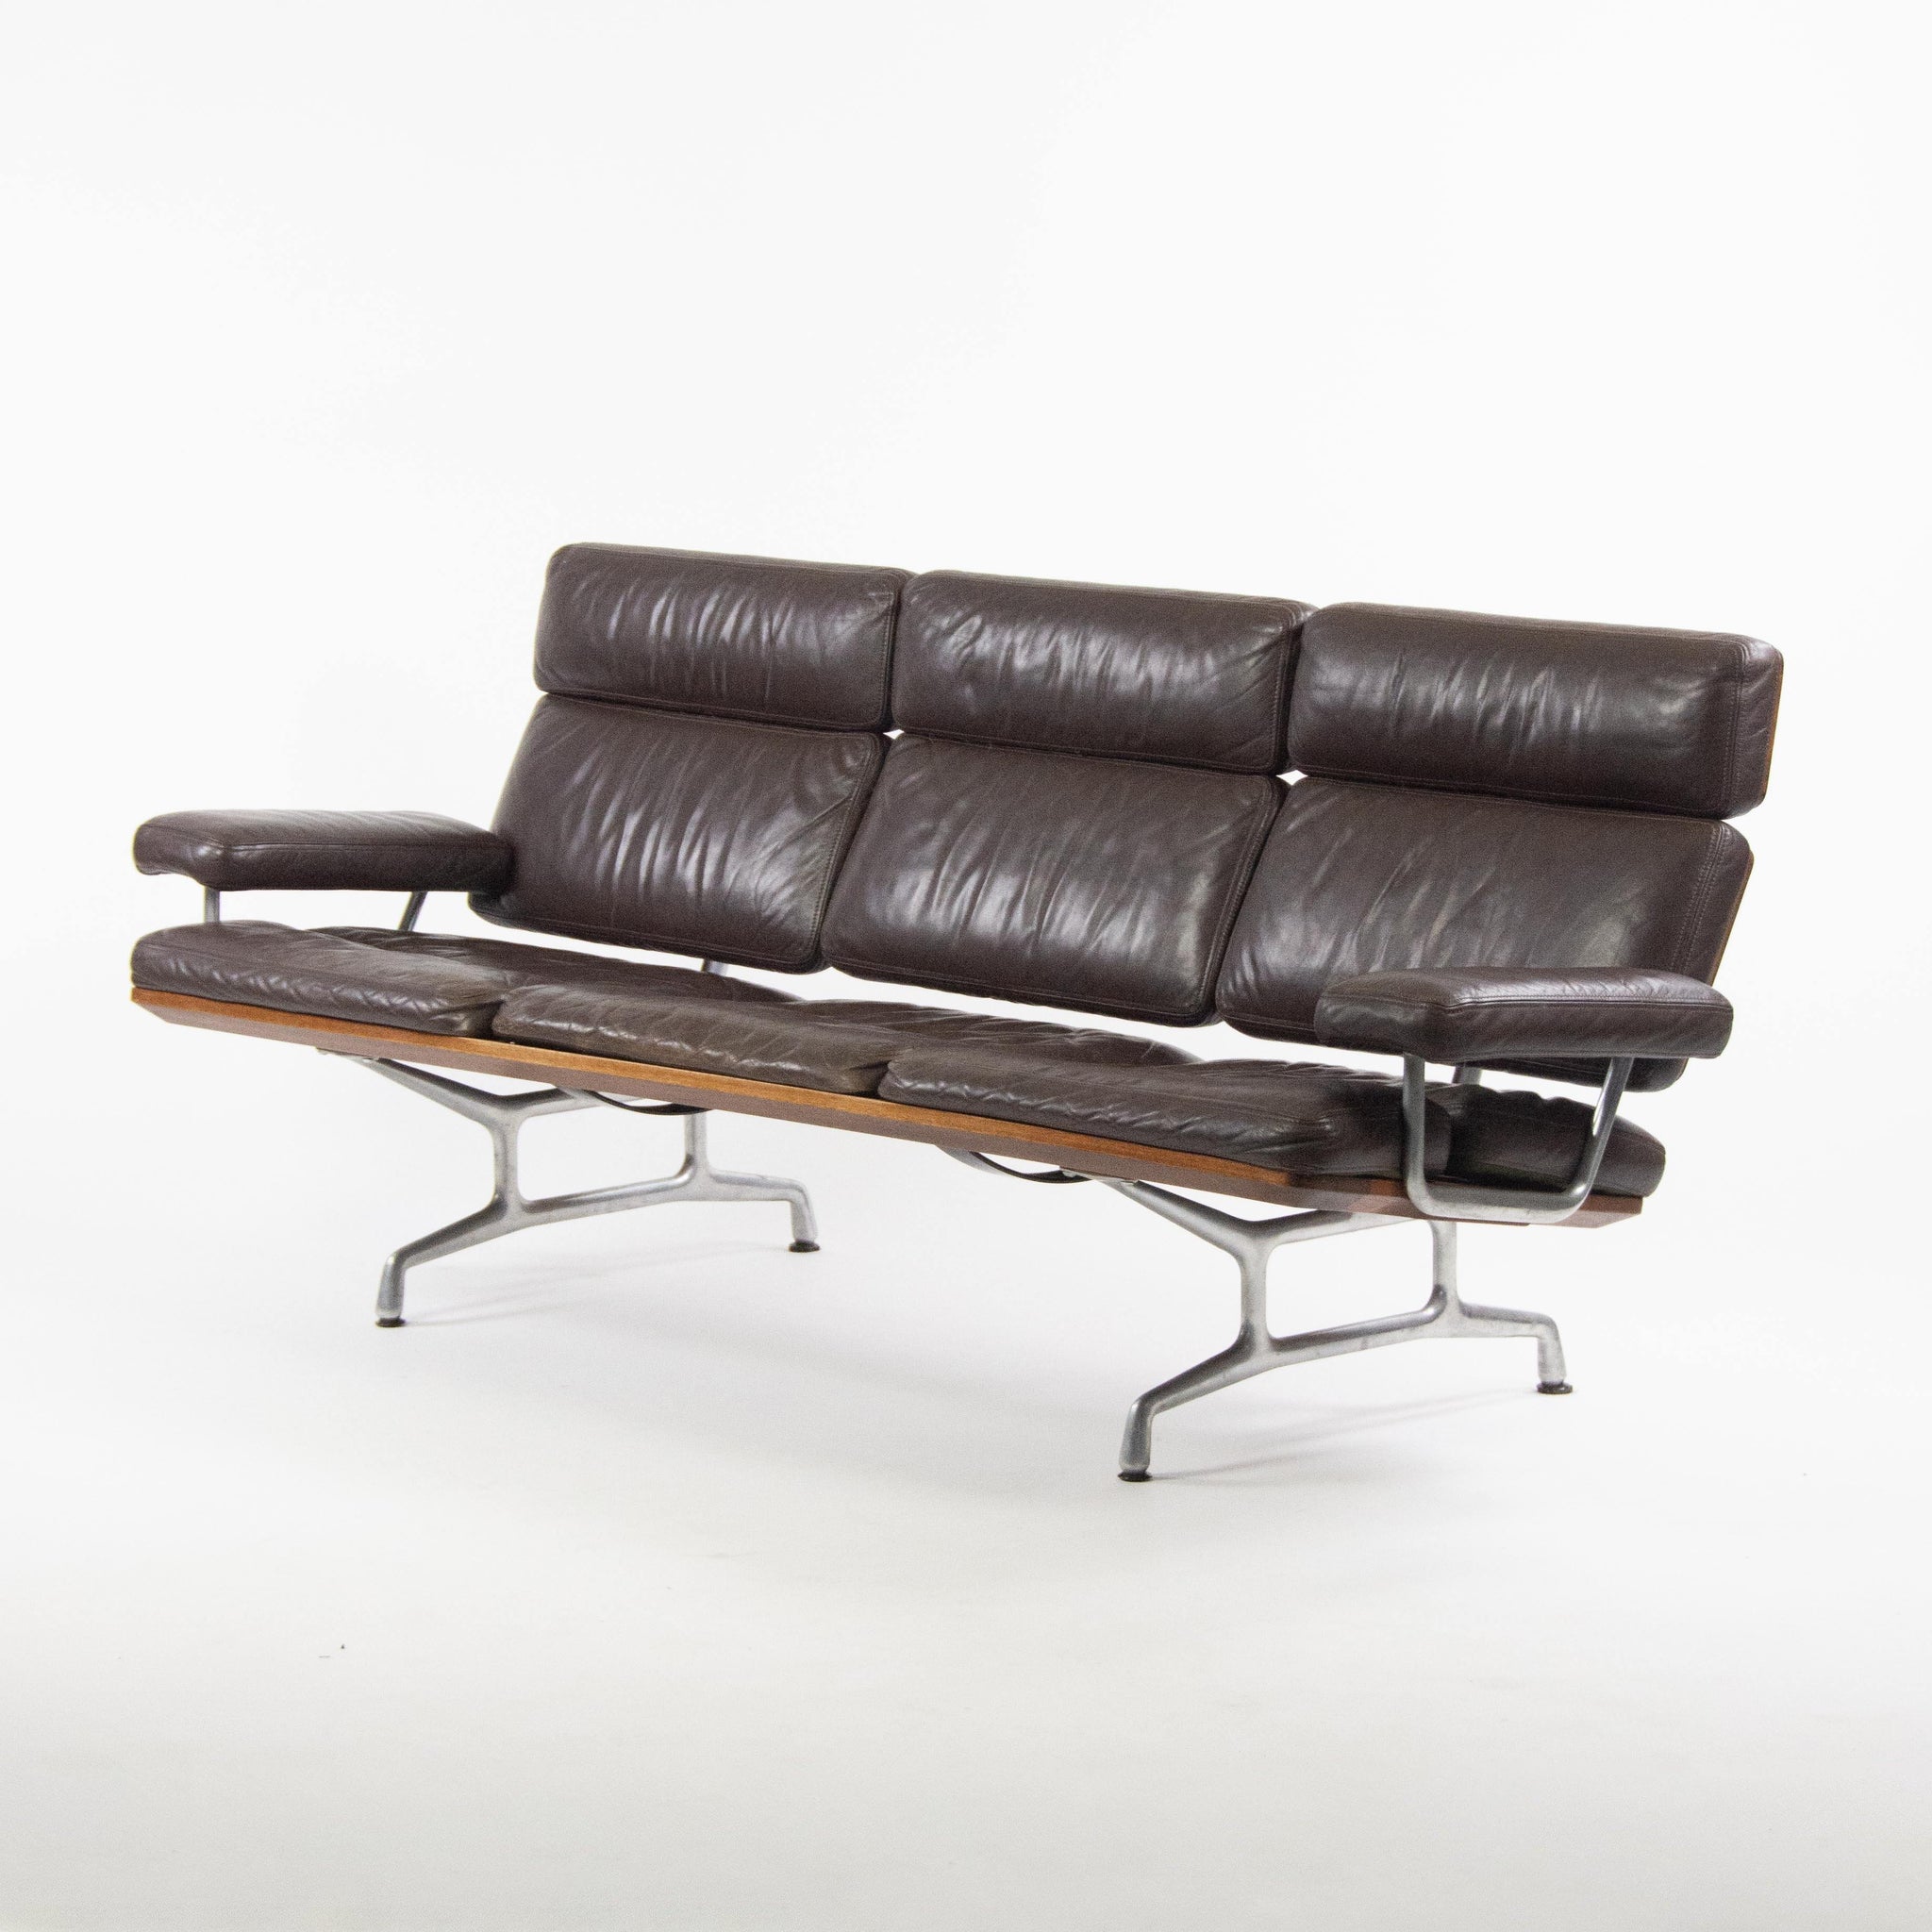 1980s Vintage Eames Herman Miller Three Seater Sofa Walnut and Brown Leather #2 - Rarify Inc.